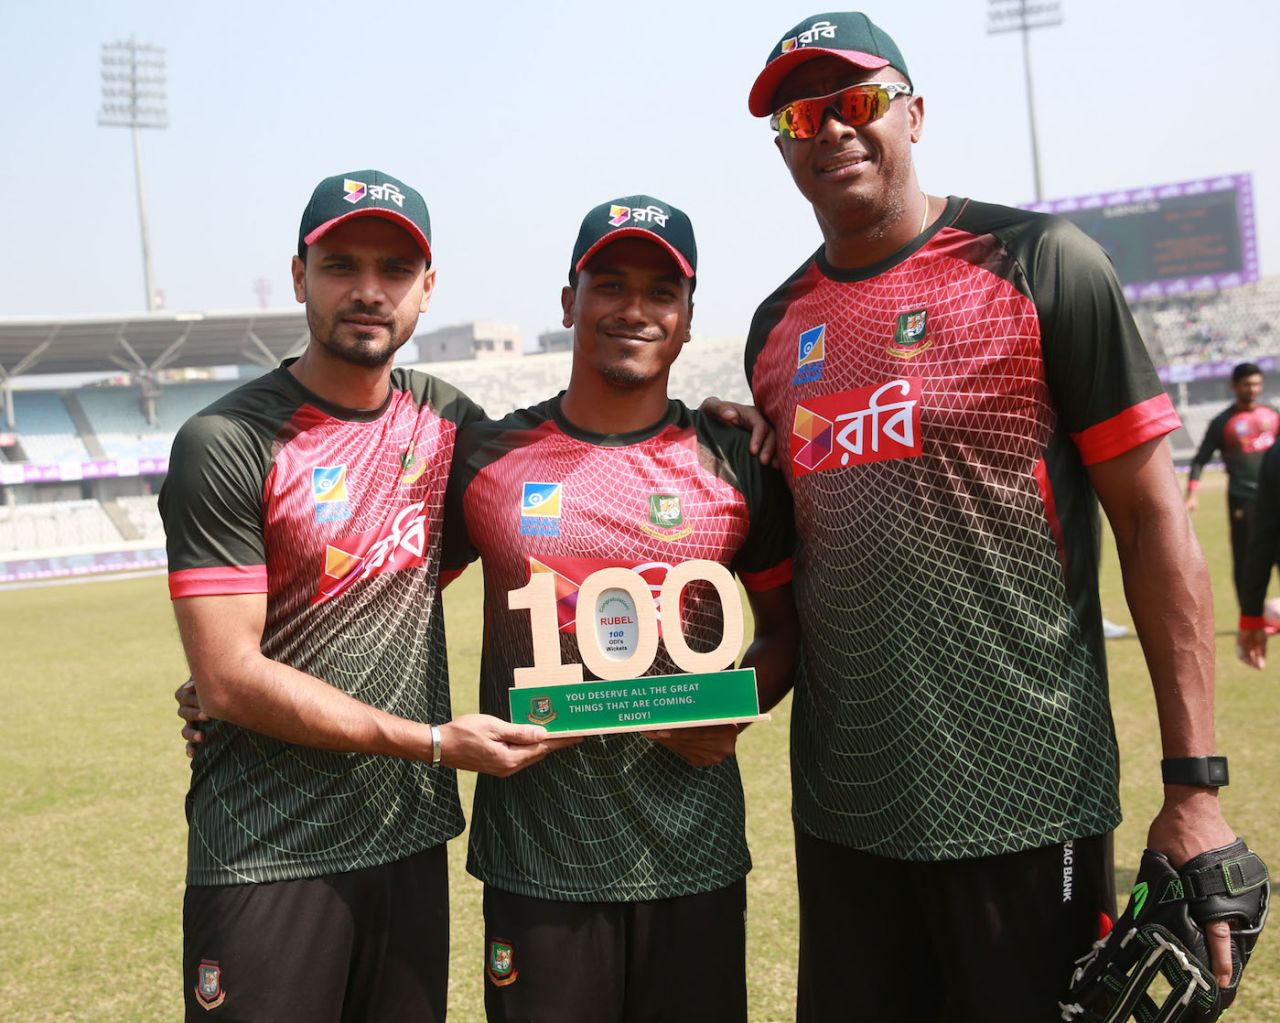 Rubel Hossain is flanked by Mashrafe Mortaza and Courtney Walsh after being felicitated for 100 ODI wickets, Bangladesh v Sri Lanka, Tri-nation series, Dhaka, January 19, 2018